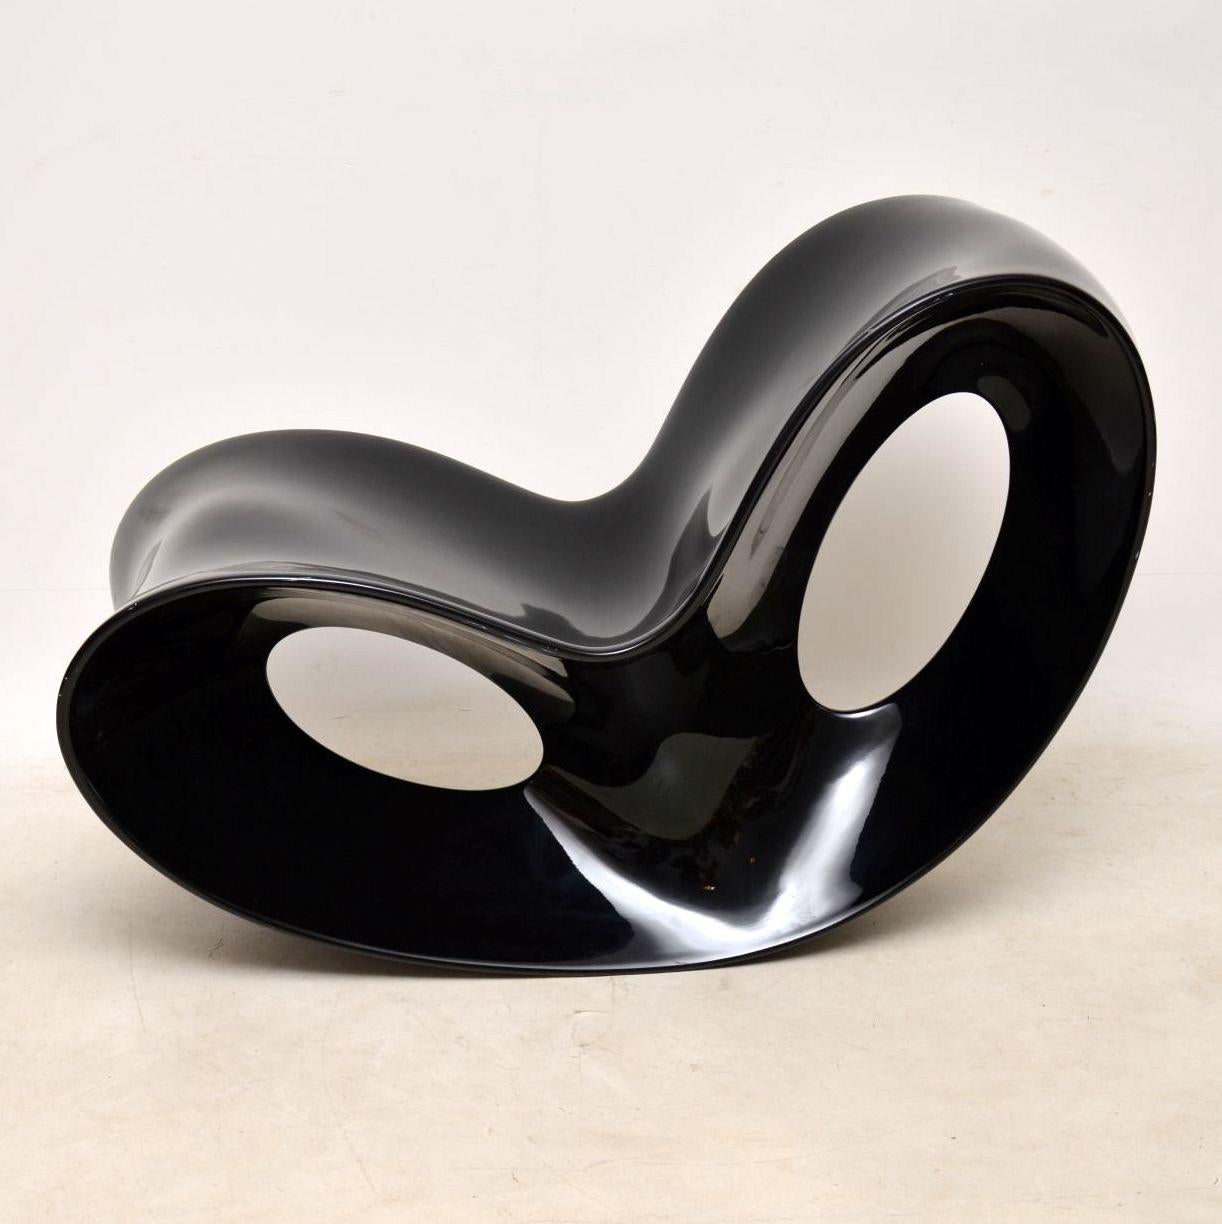 Contemporary Stunning and Iconic Design, This Is the ‘Voido’ Rocking Chair in a Black Glos